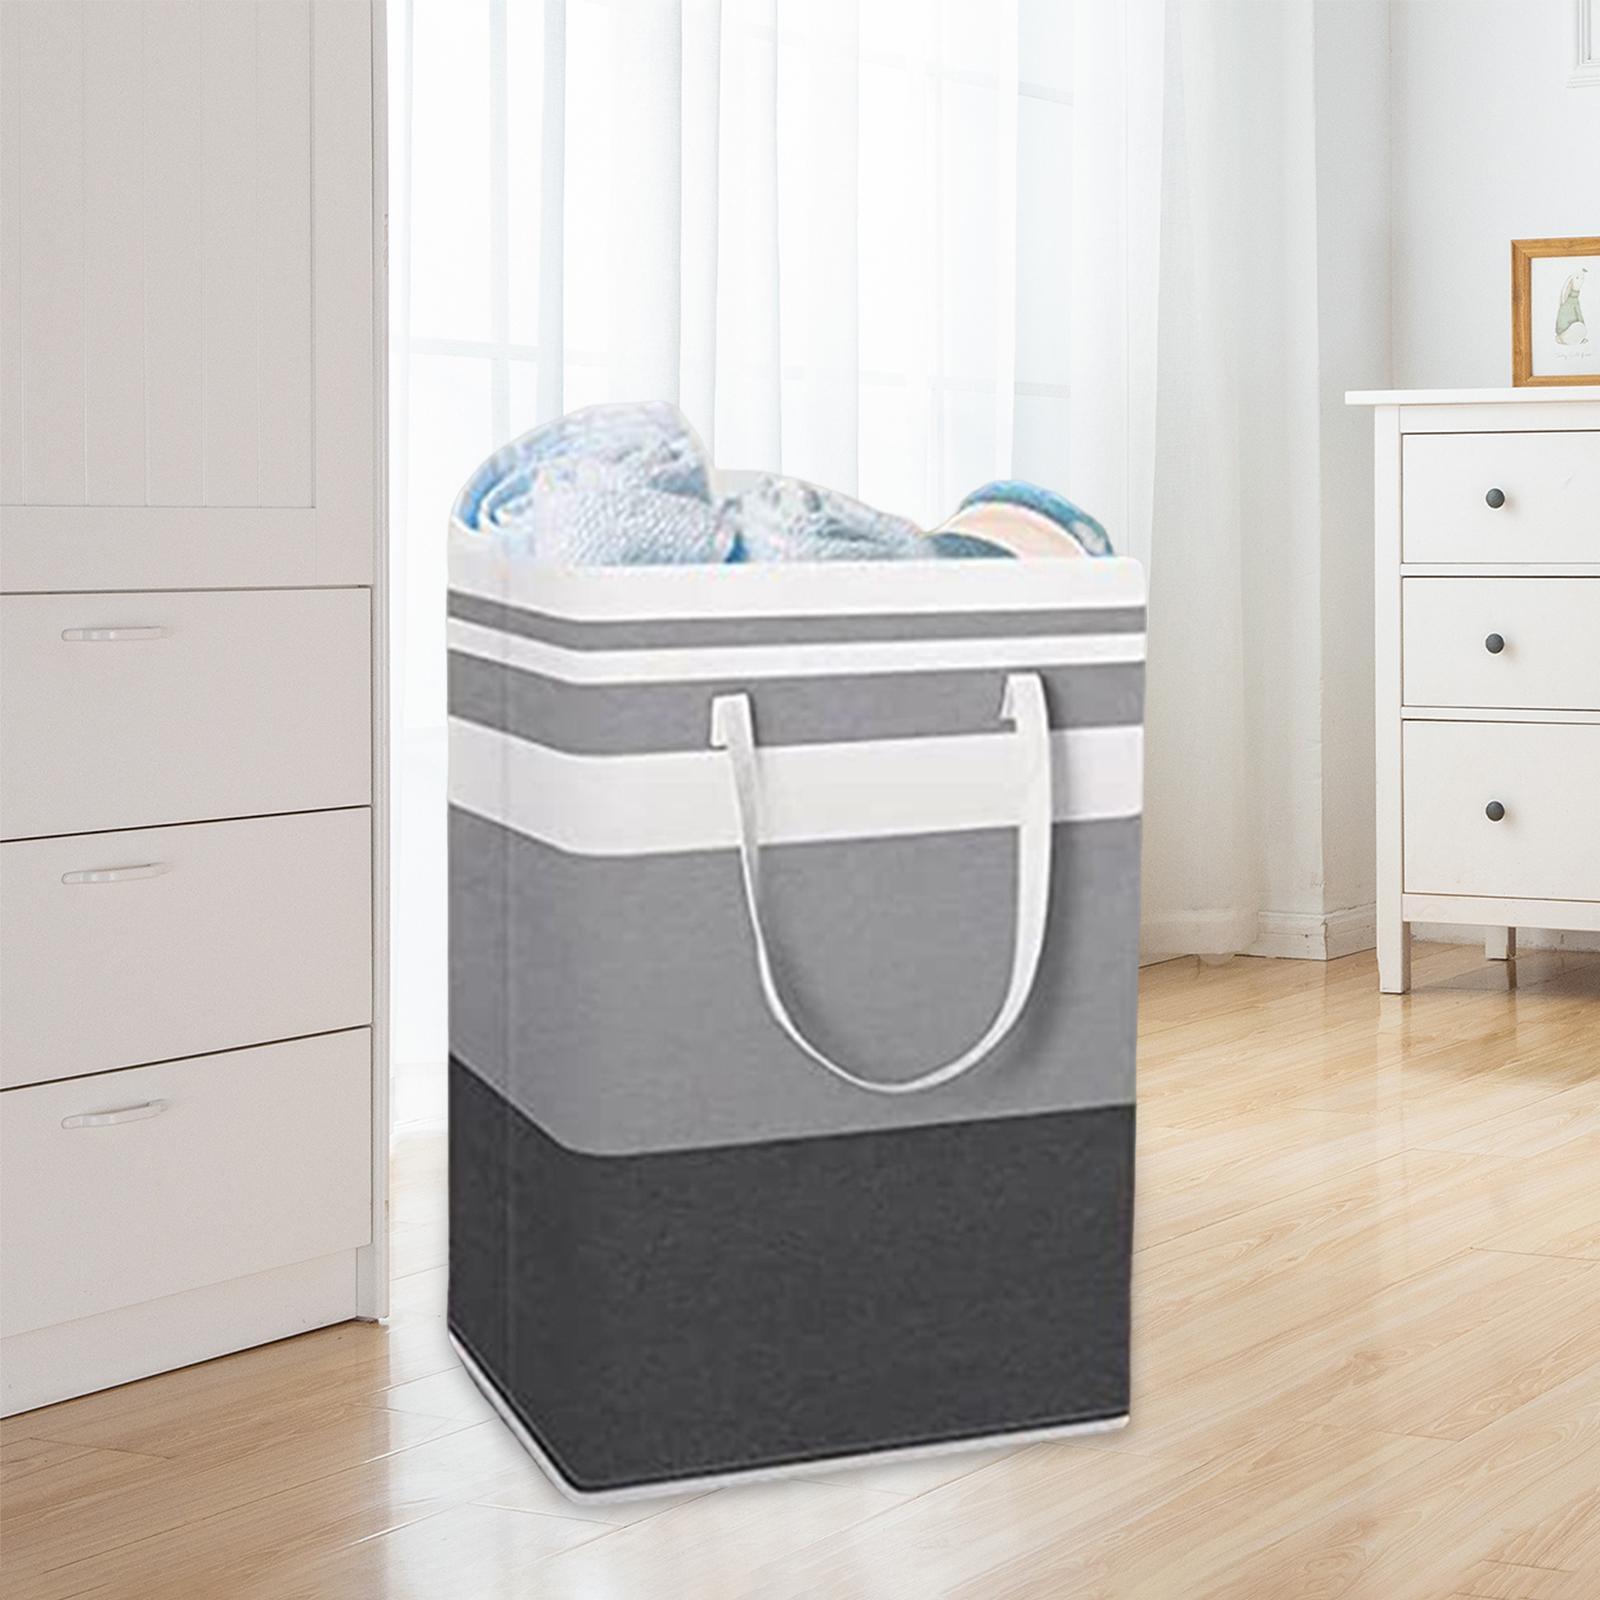 Clothes Storage Basket Multipurpose Space Saving Portable for Home Travel